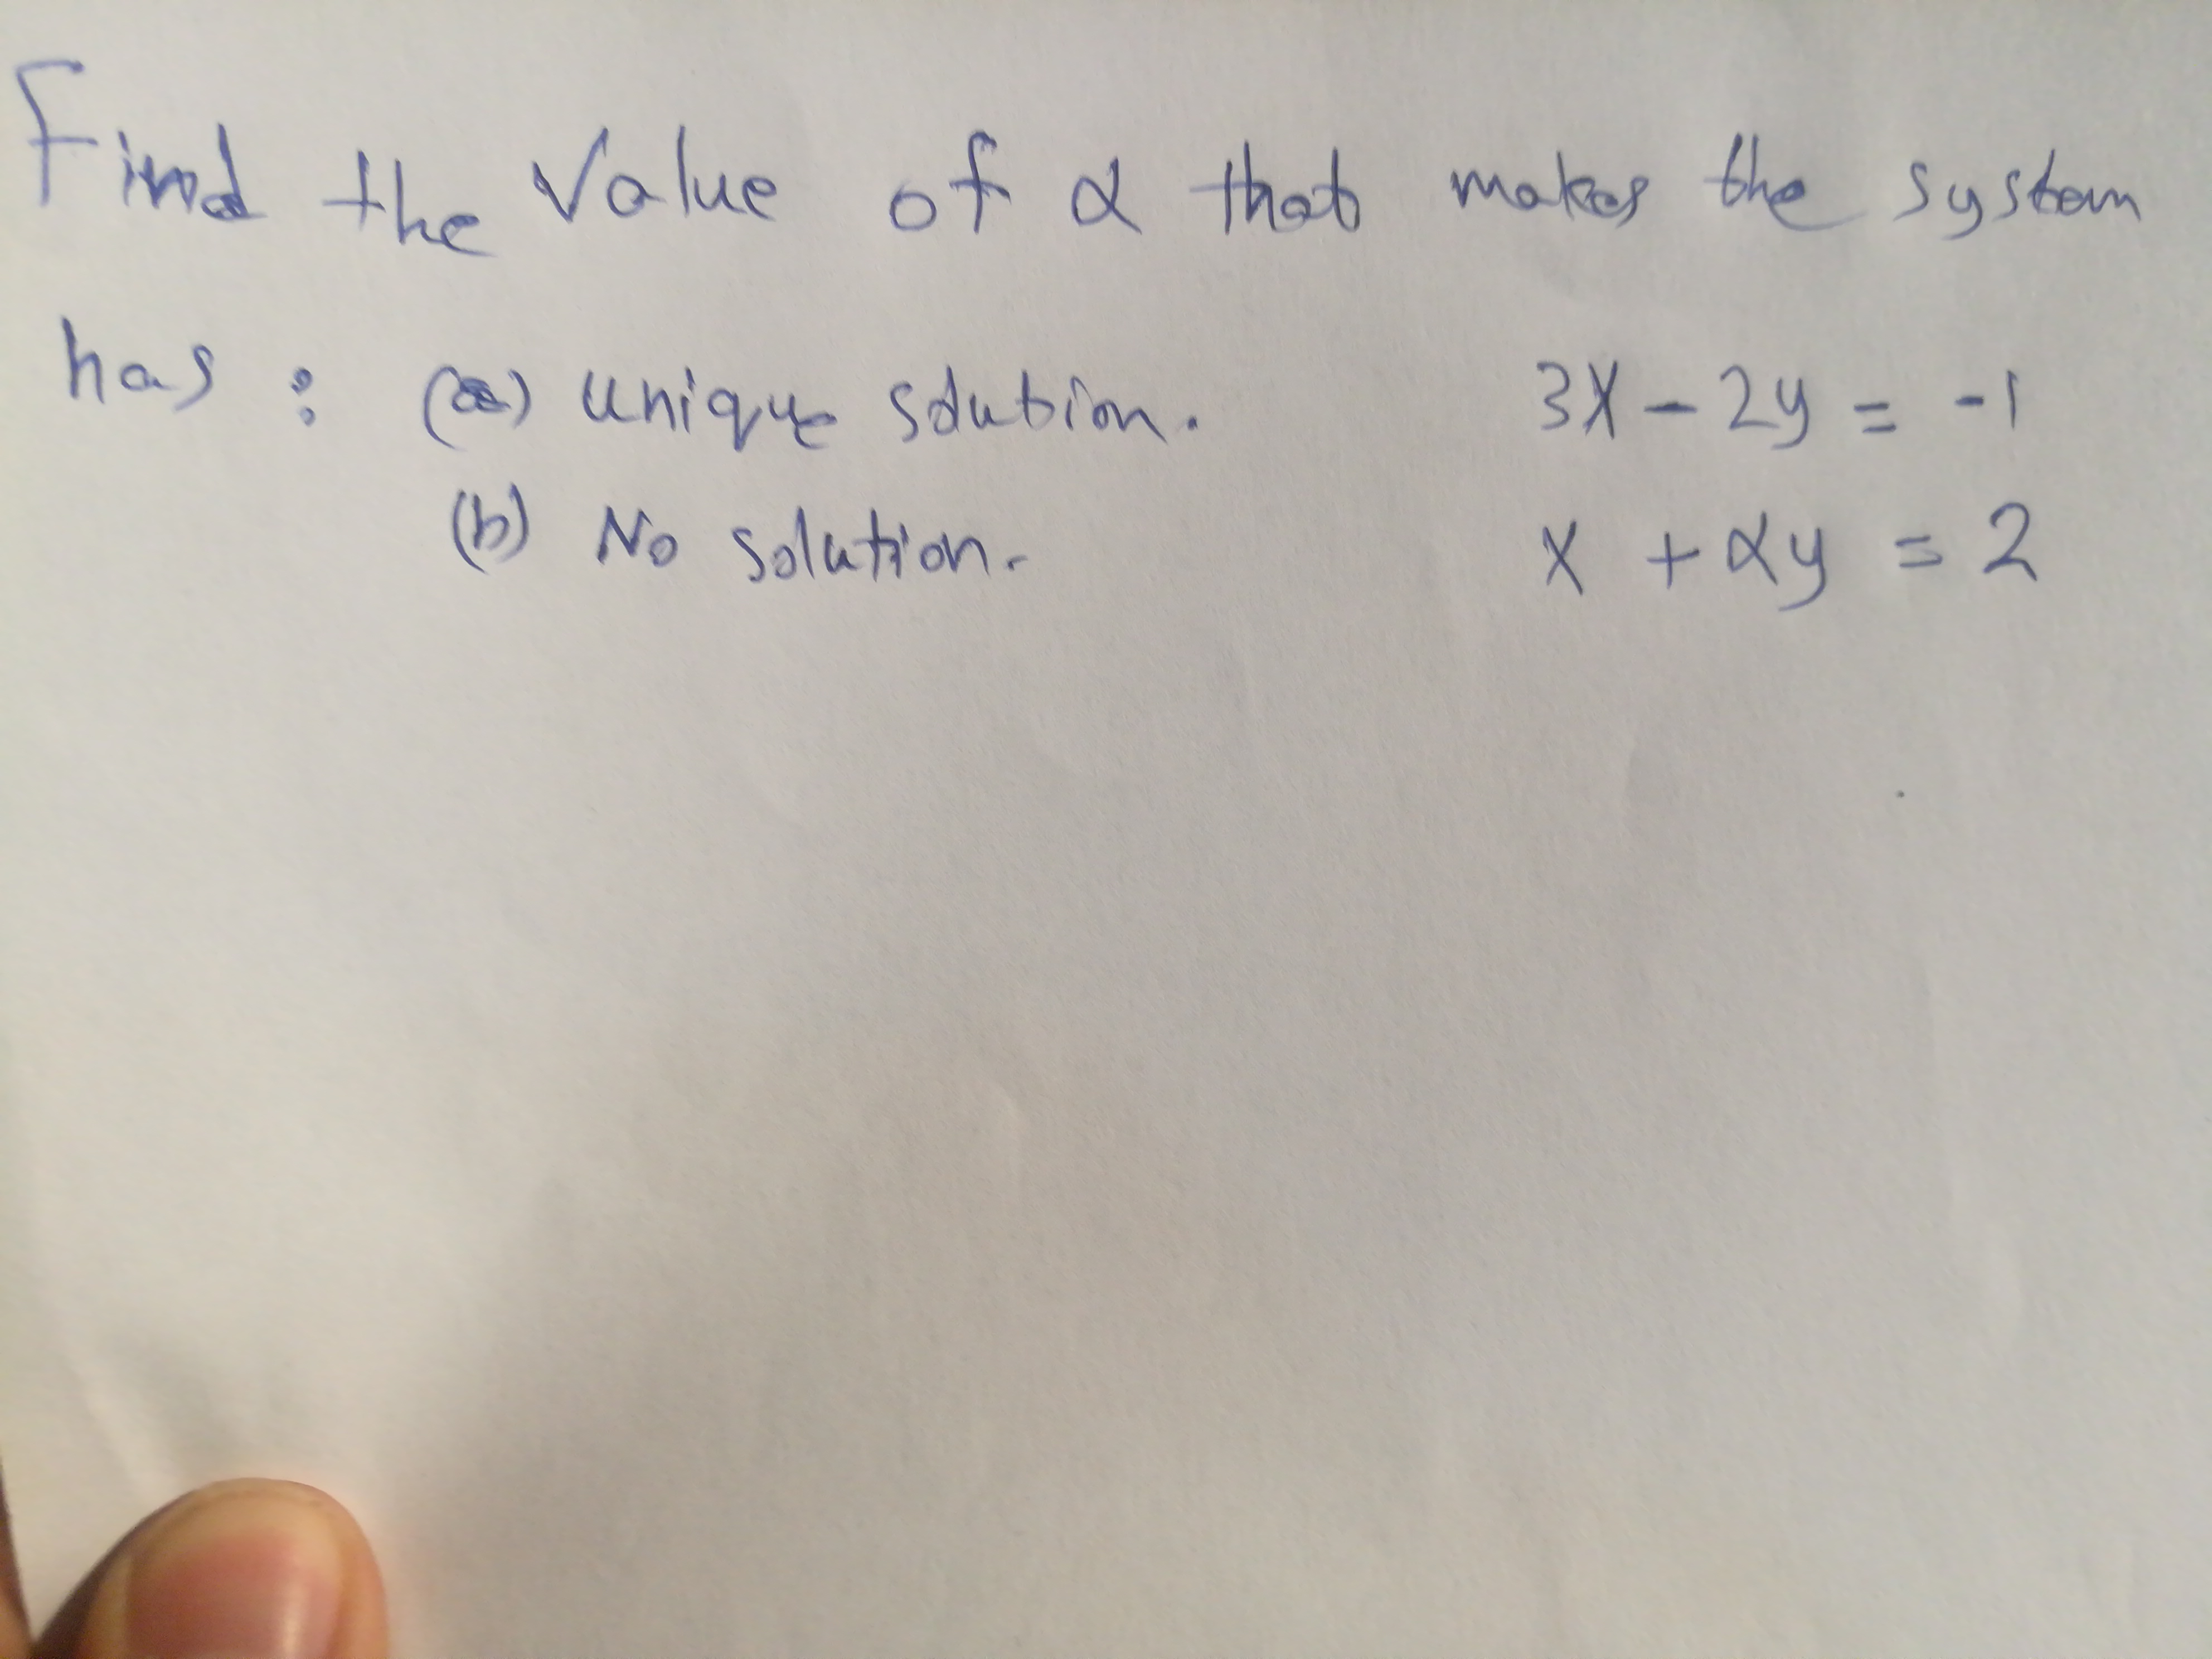 tind the
Value of d that makes the systom
has
(2)
uniqe Sdubion.
3X-2y=
(b) No .
Solation
X+Xy = 2
11
